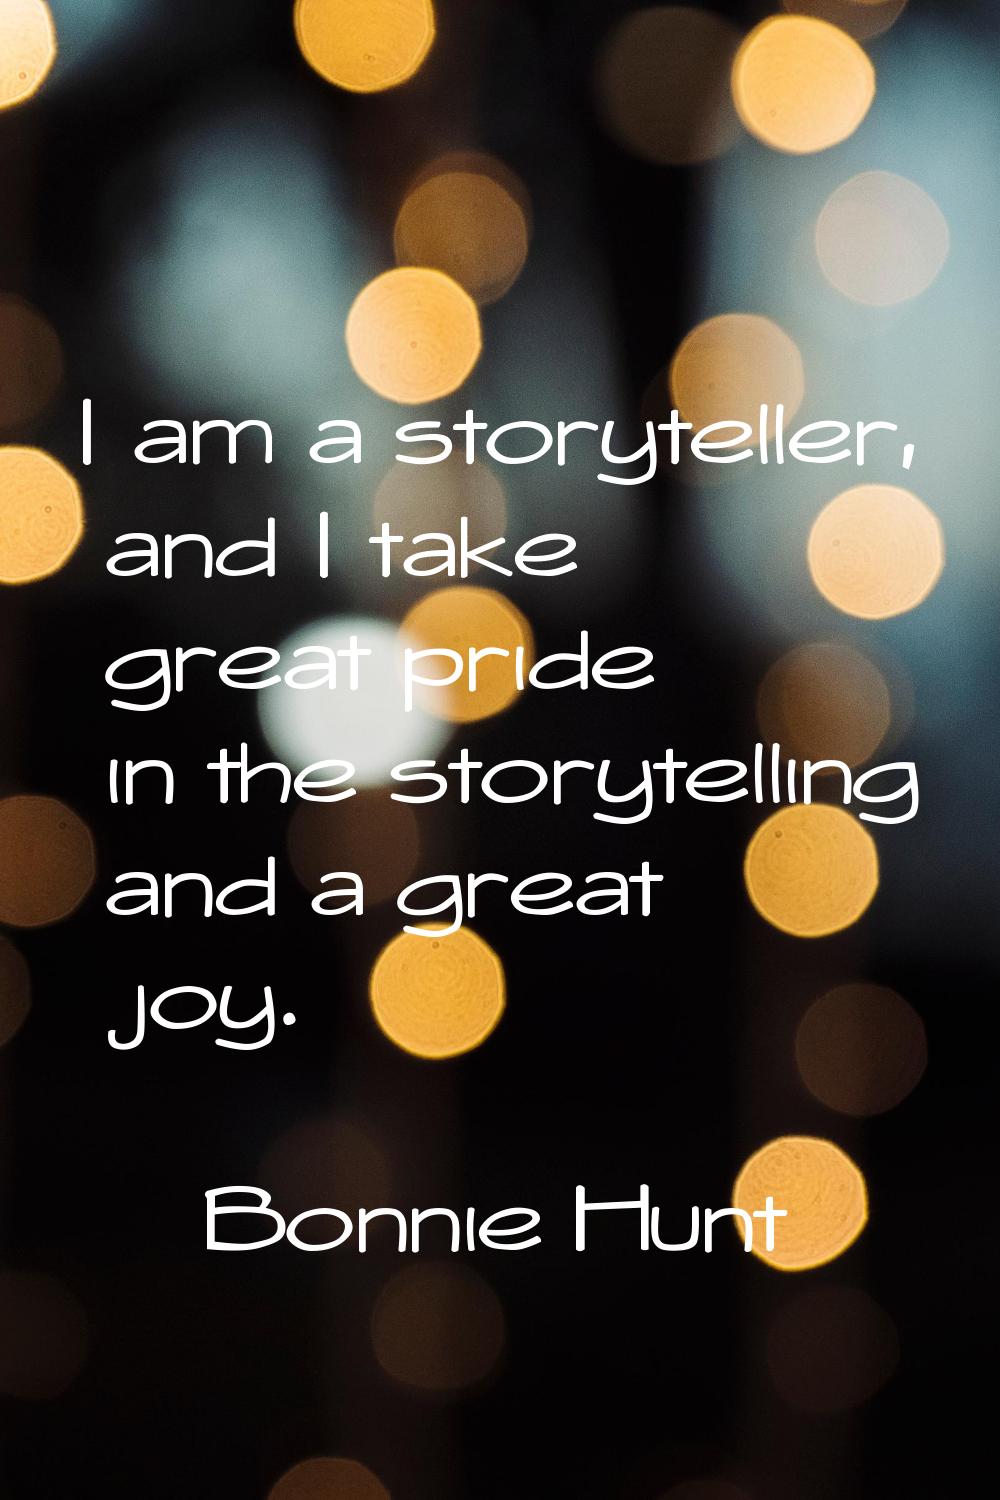 I am a storyteller, and I take great pride in the storytelling and a great joy.